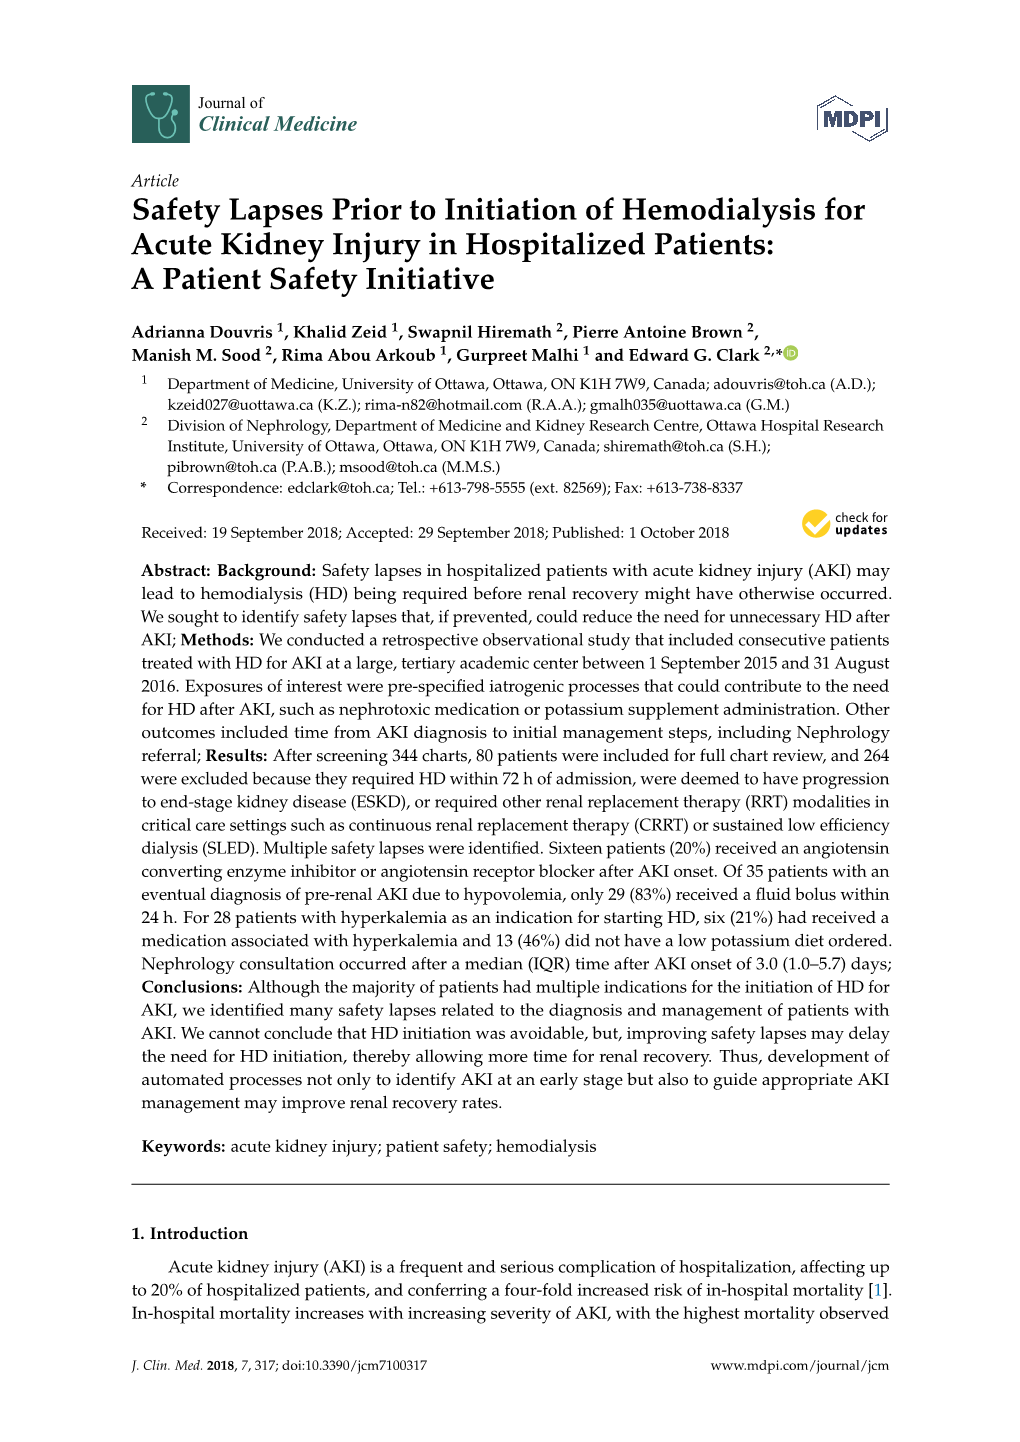 Safety Lapses Prior to Initiation of Hemodialysis for Acute Kidney Injury in Hospitalized Patients: a Patient Safety Initiative